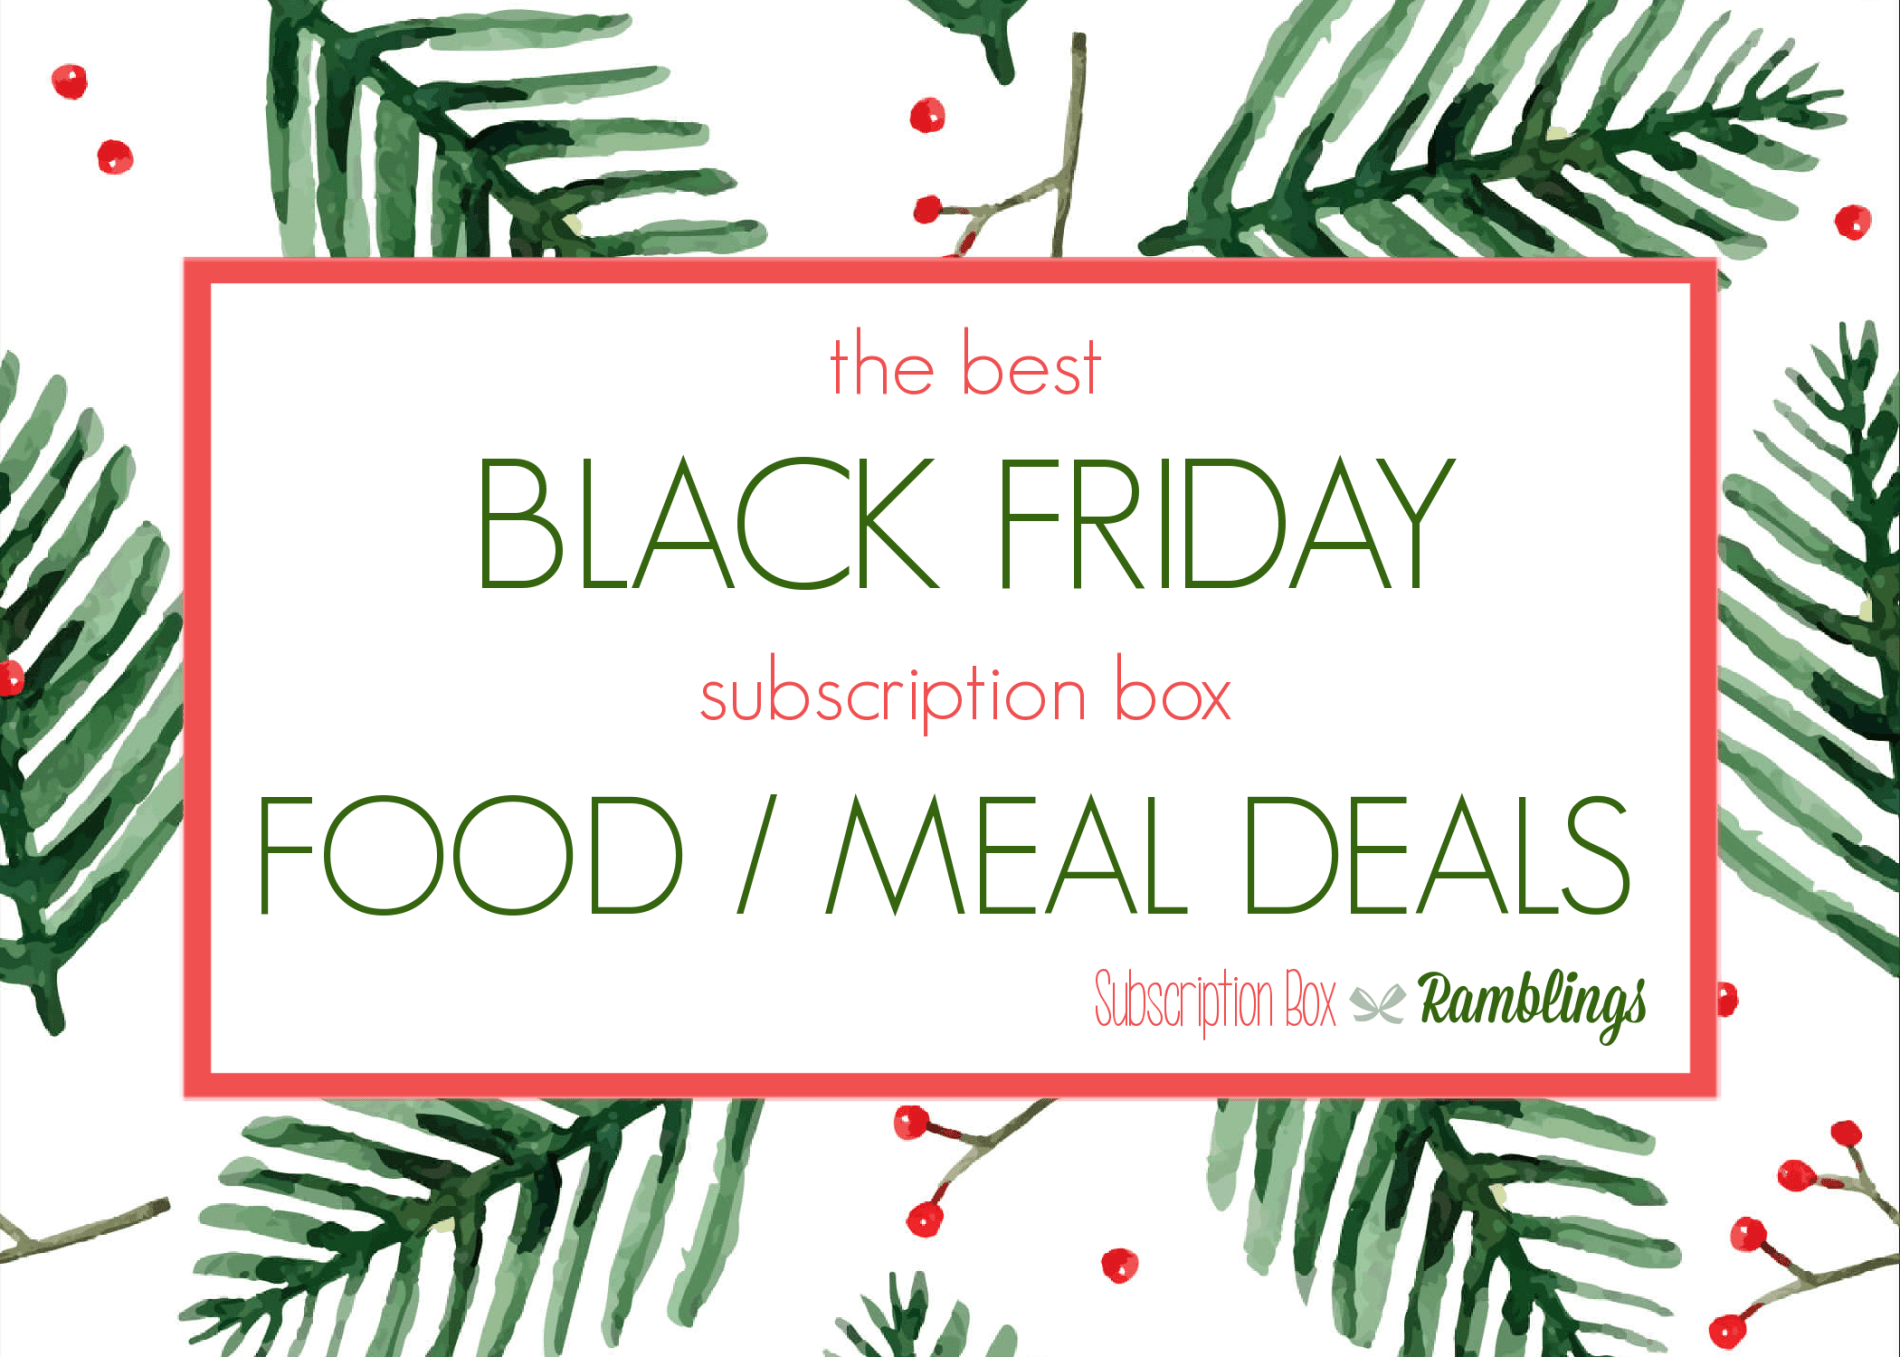 The Best Black Friday Subscription Box Deals on FOOD / MEAL Service Boxes!